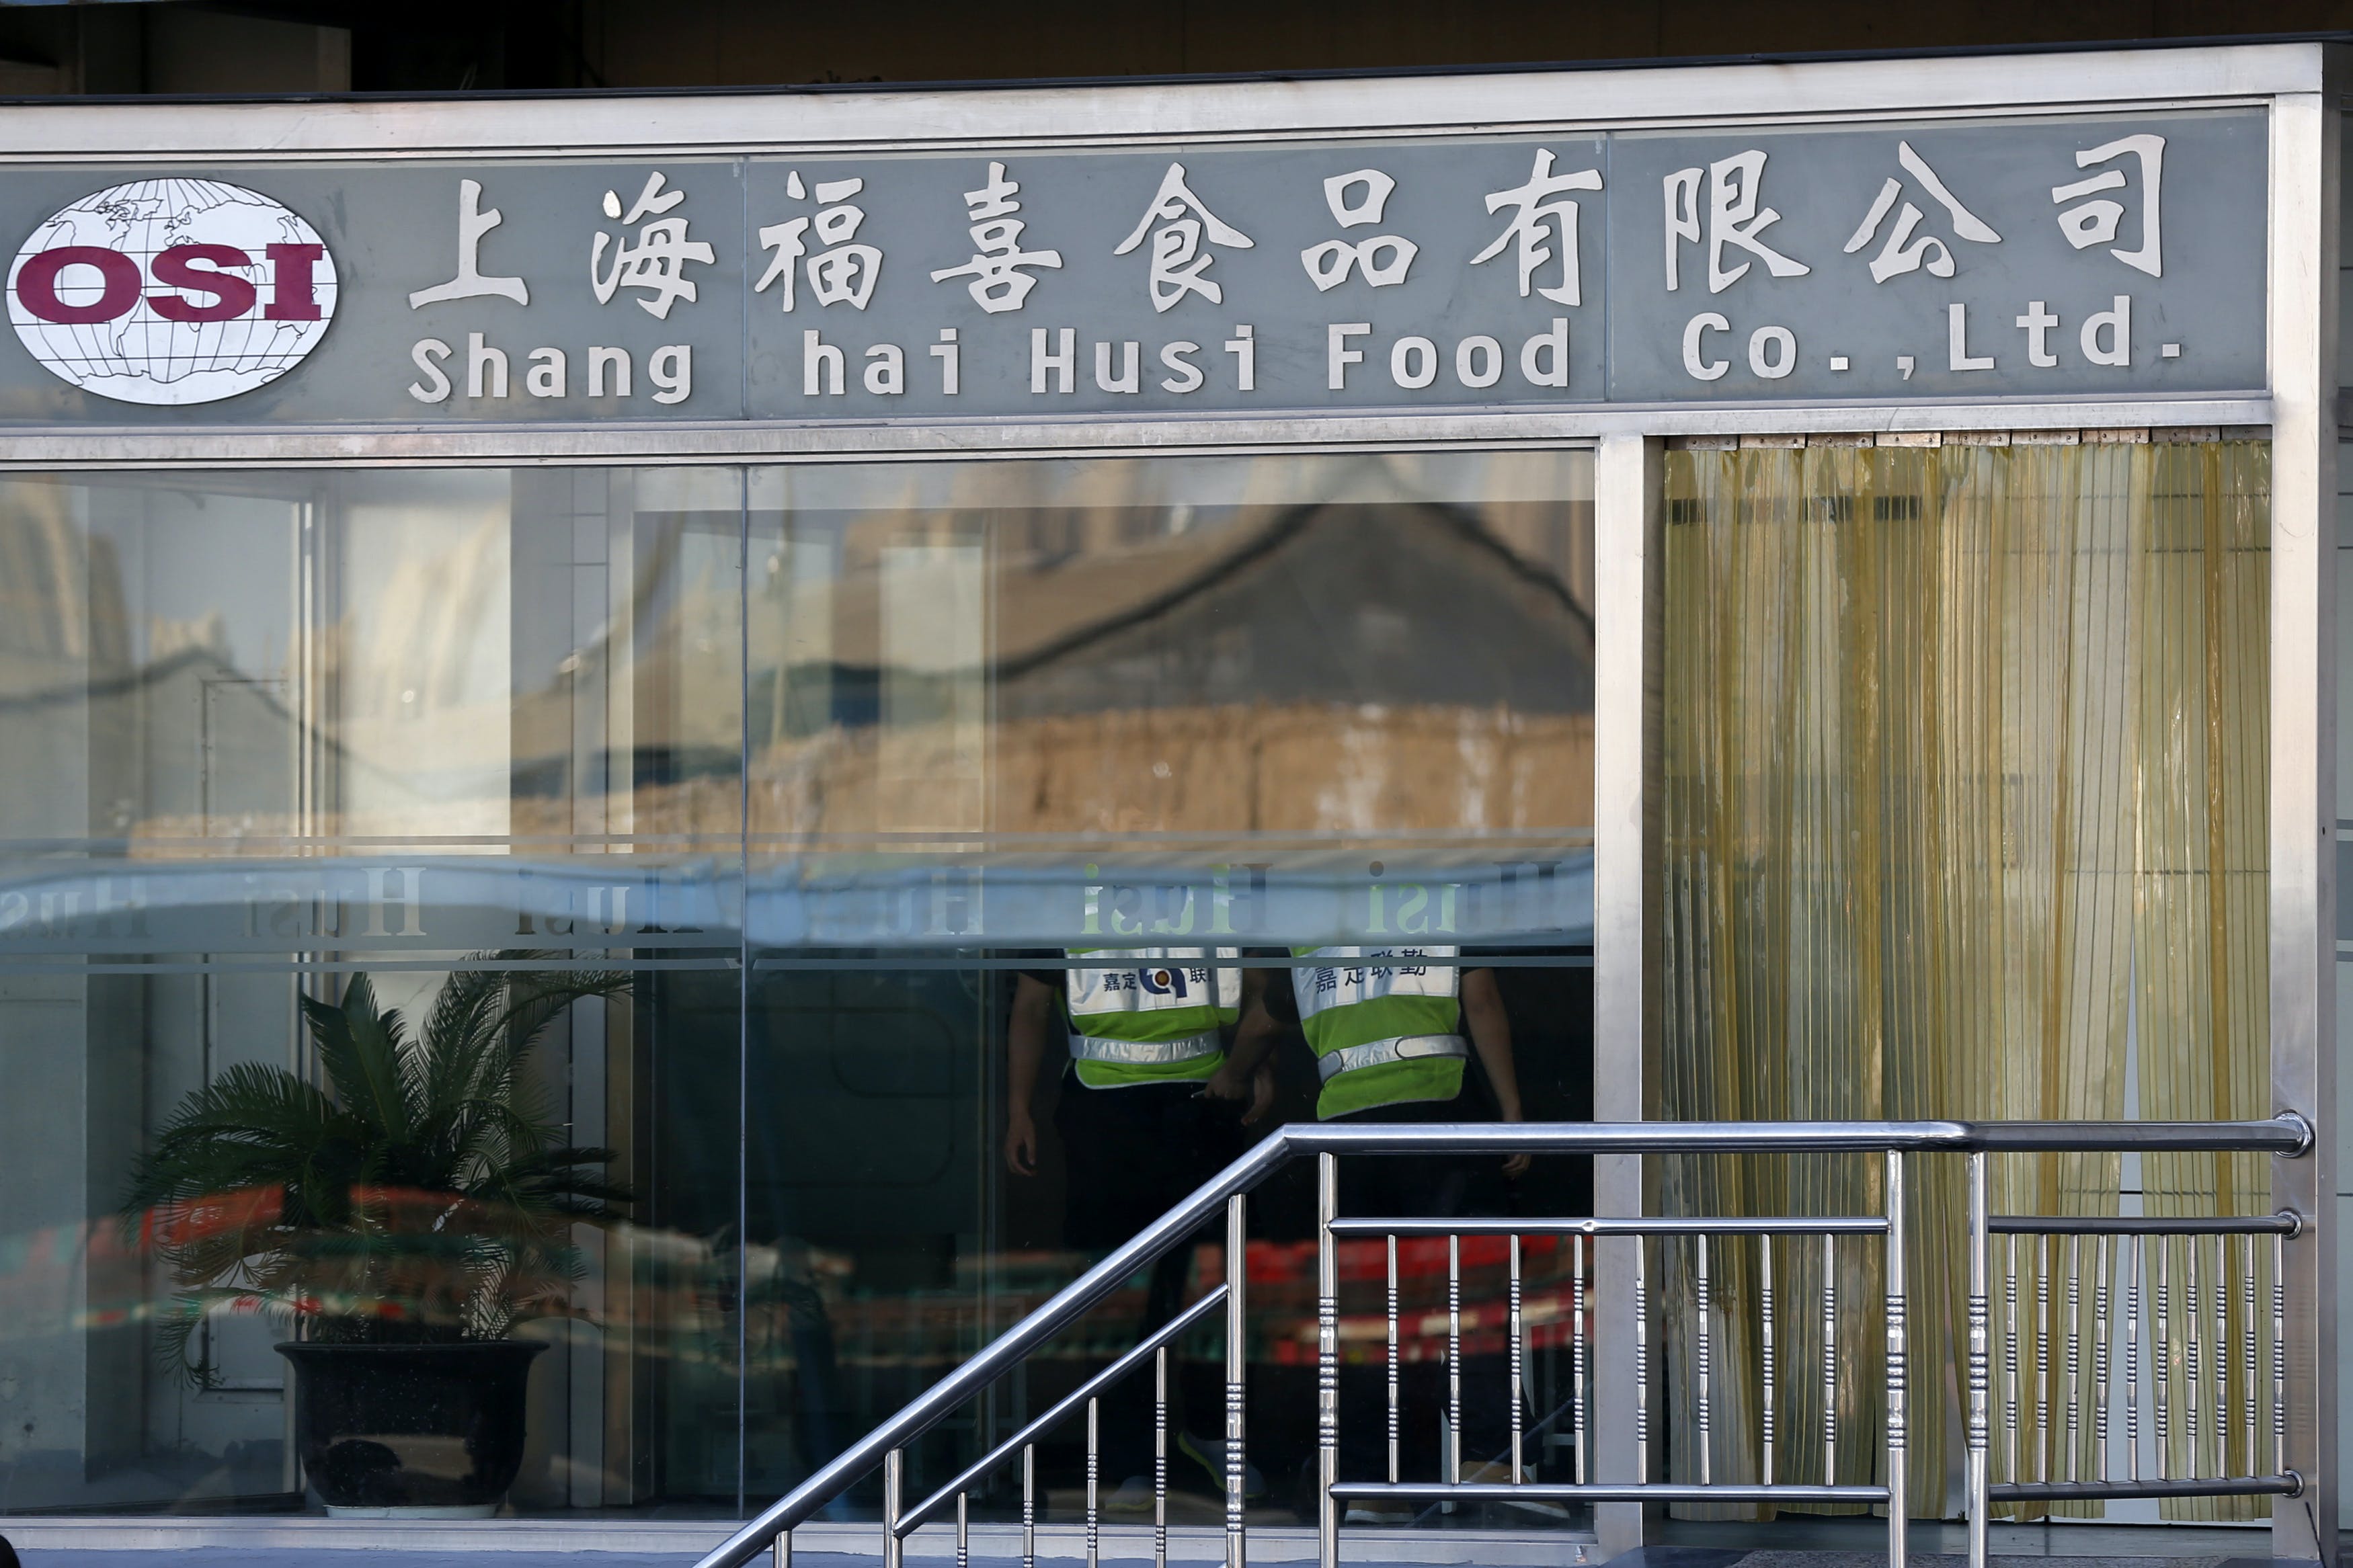 Security guards stand inside the Husi Food factory in Shanghai